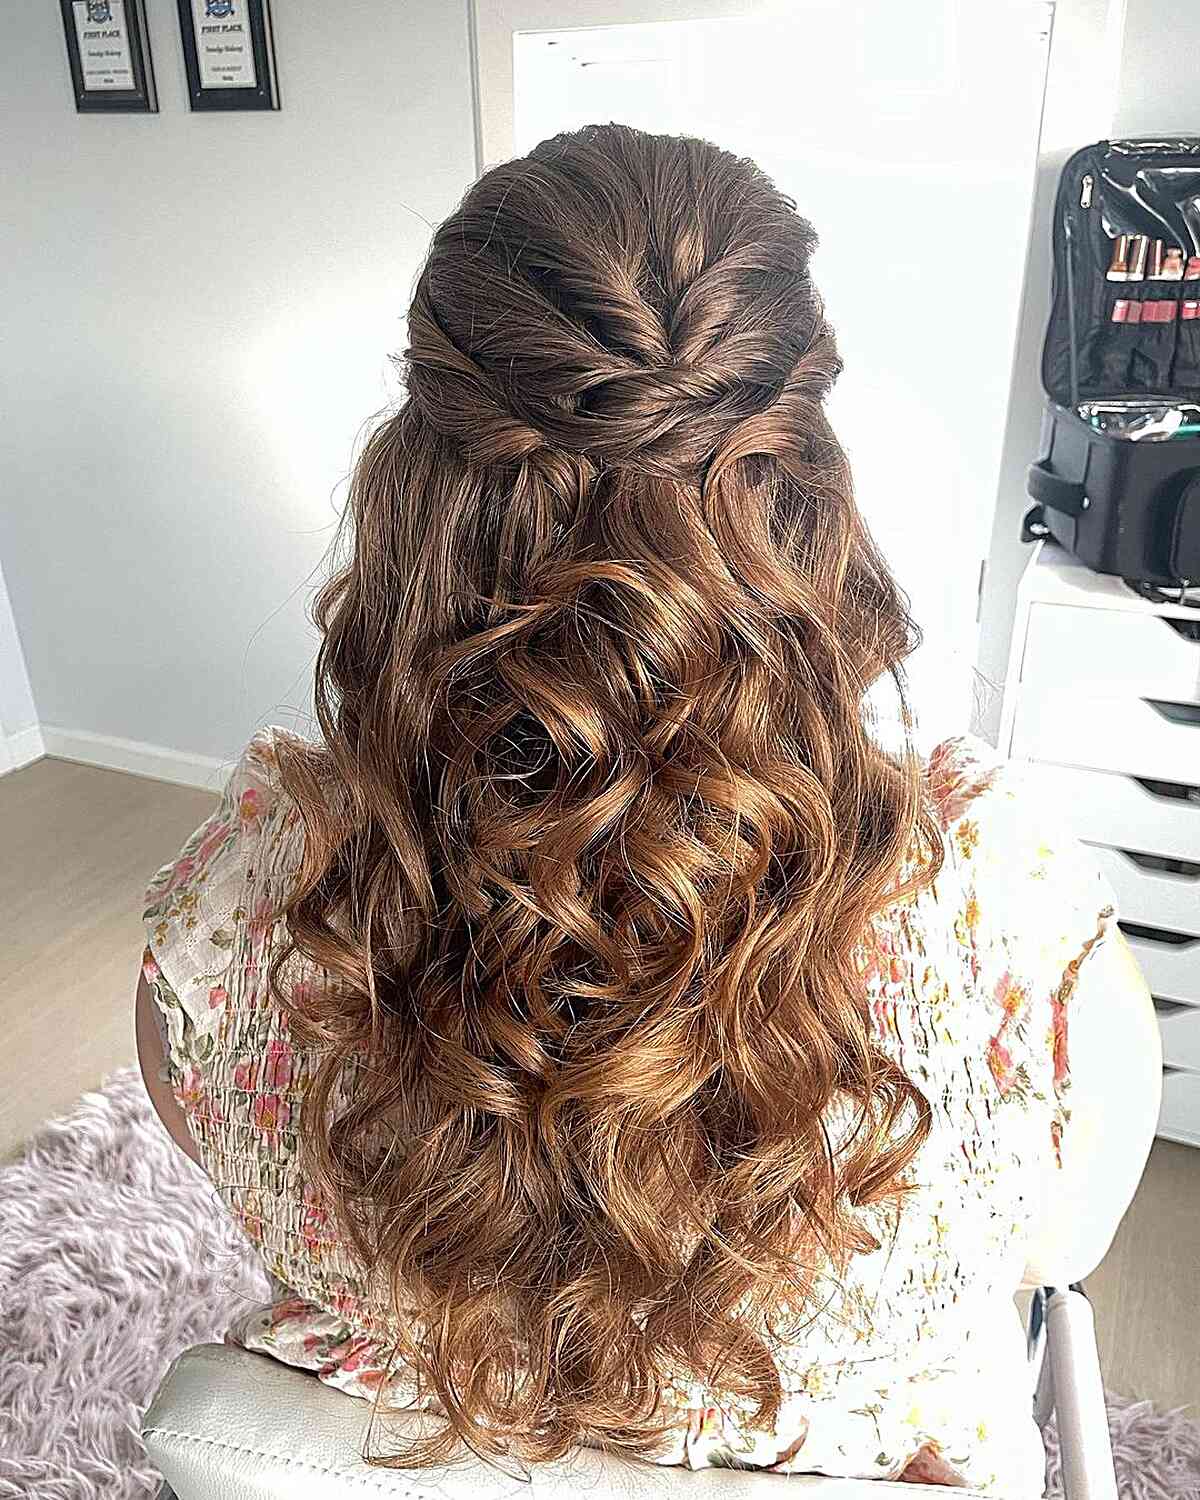 10 Curly Wedding Hairstyles and Tips for Brides with Naturally Wavy Hair |  Make Me Bridal